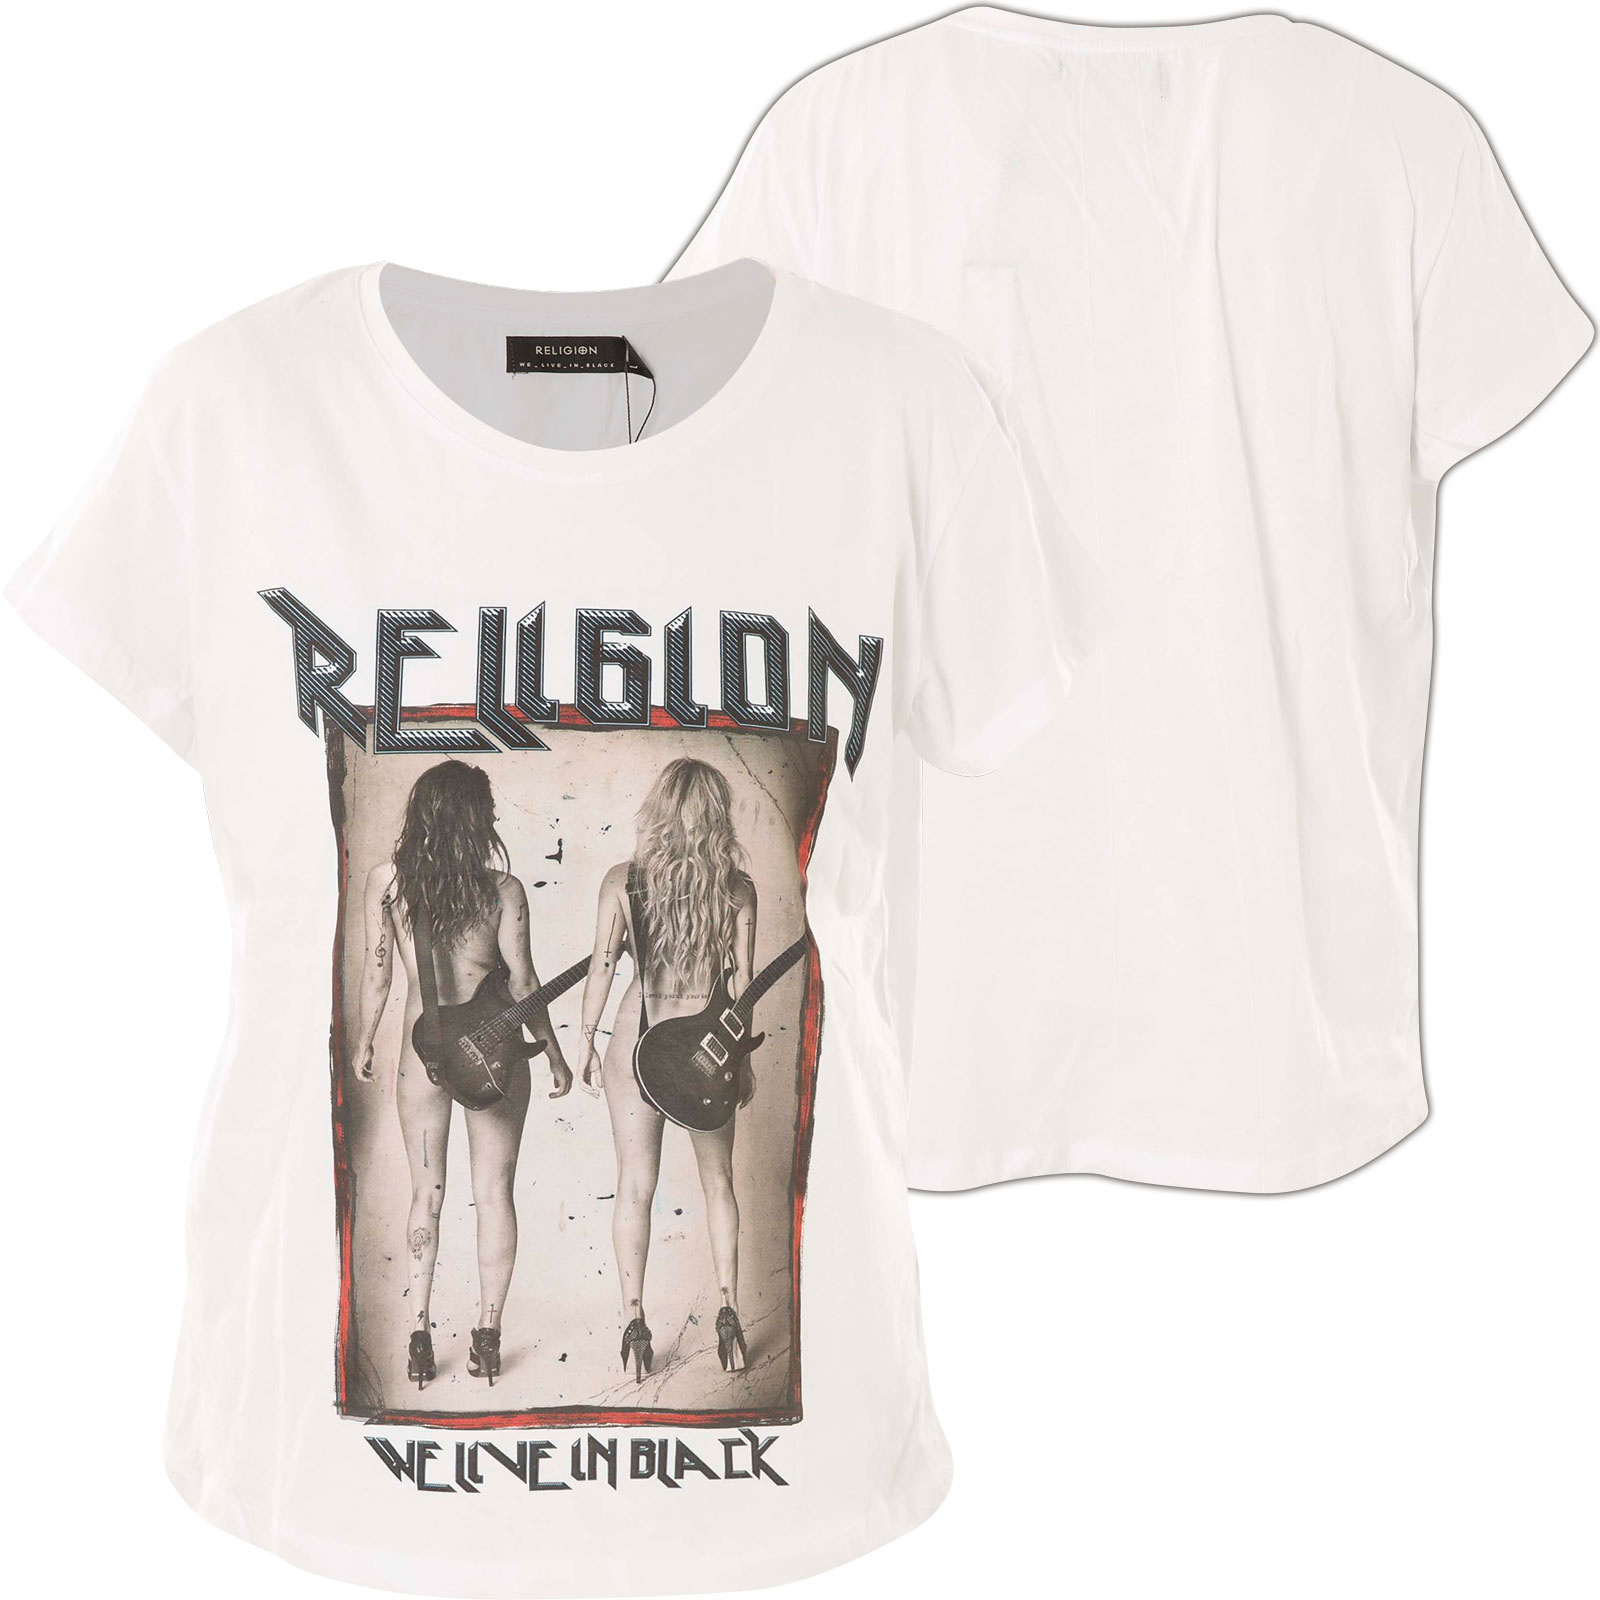 Religion T Shirt Jaunt Tee 58ejut37 Featuring A Large Print Of Women